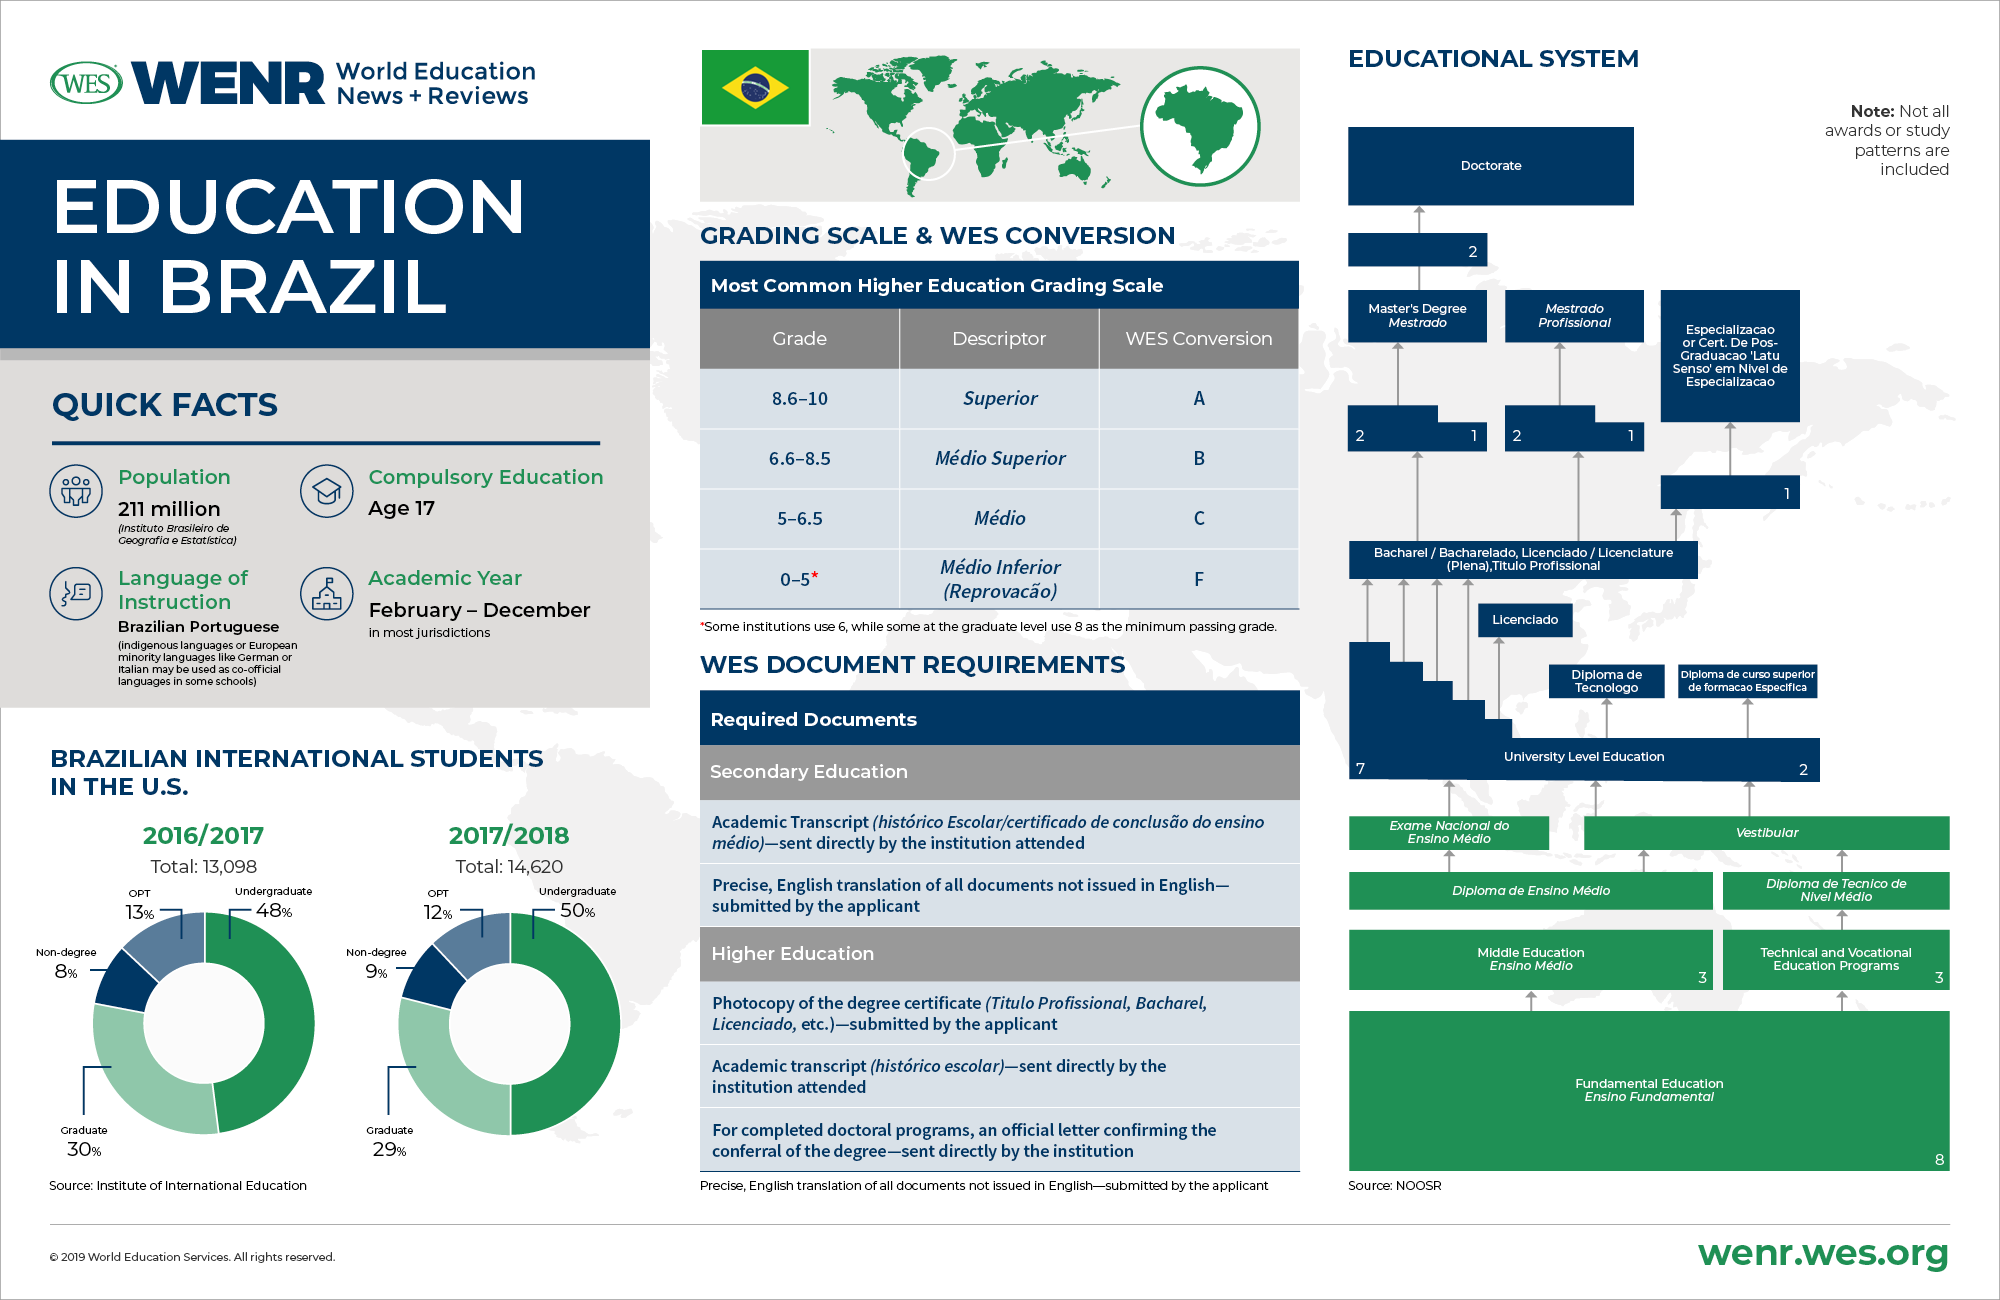 Education in Brazil infographic: quick facts about education in Brazil